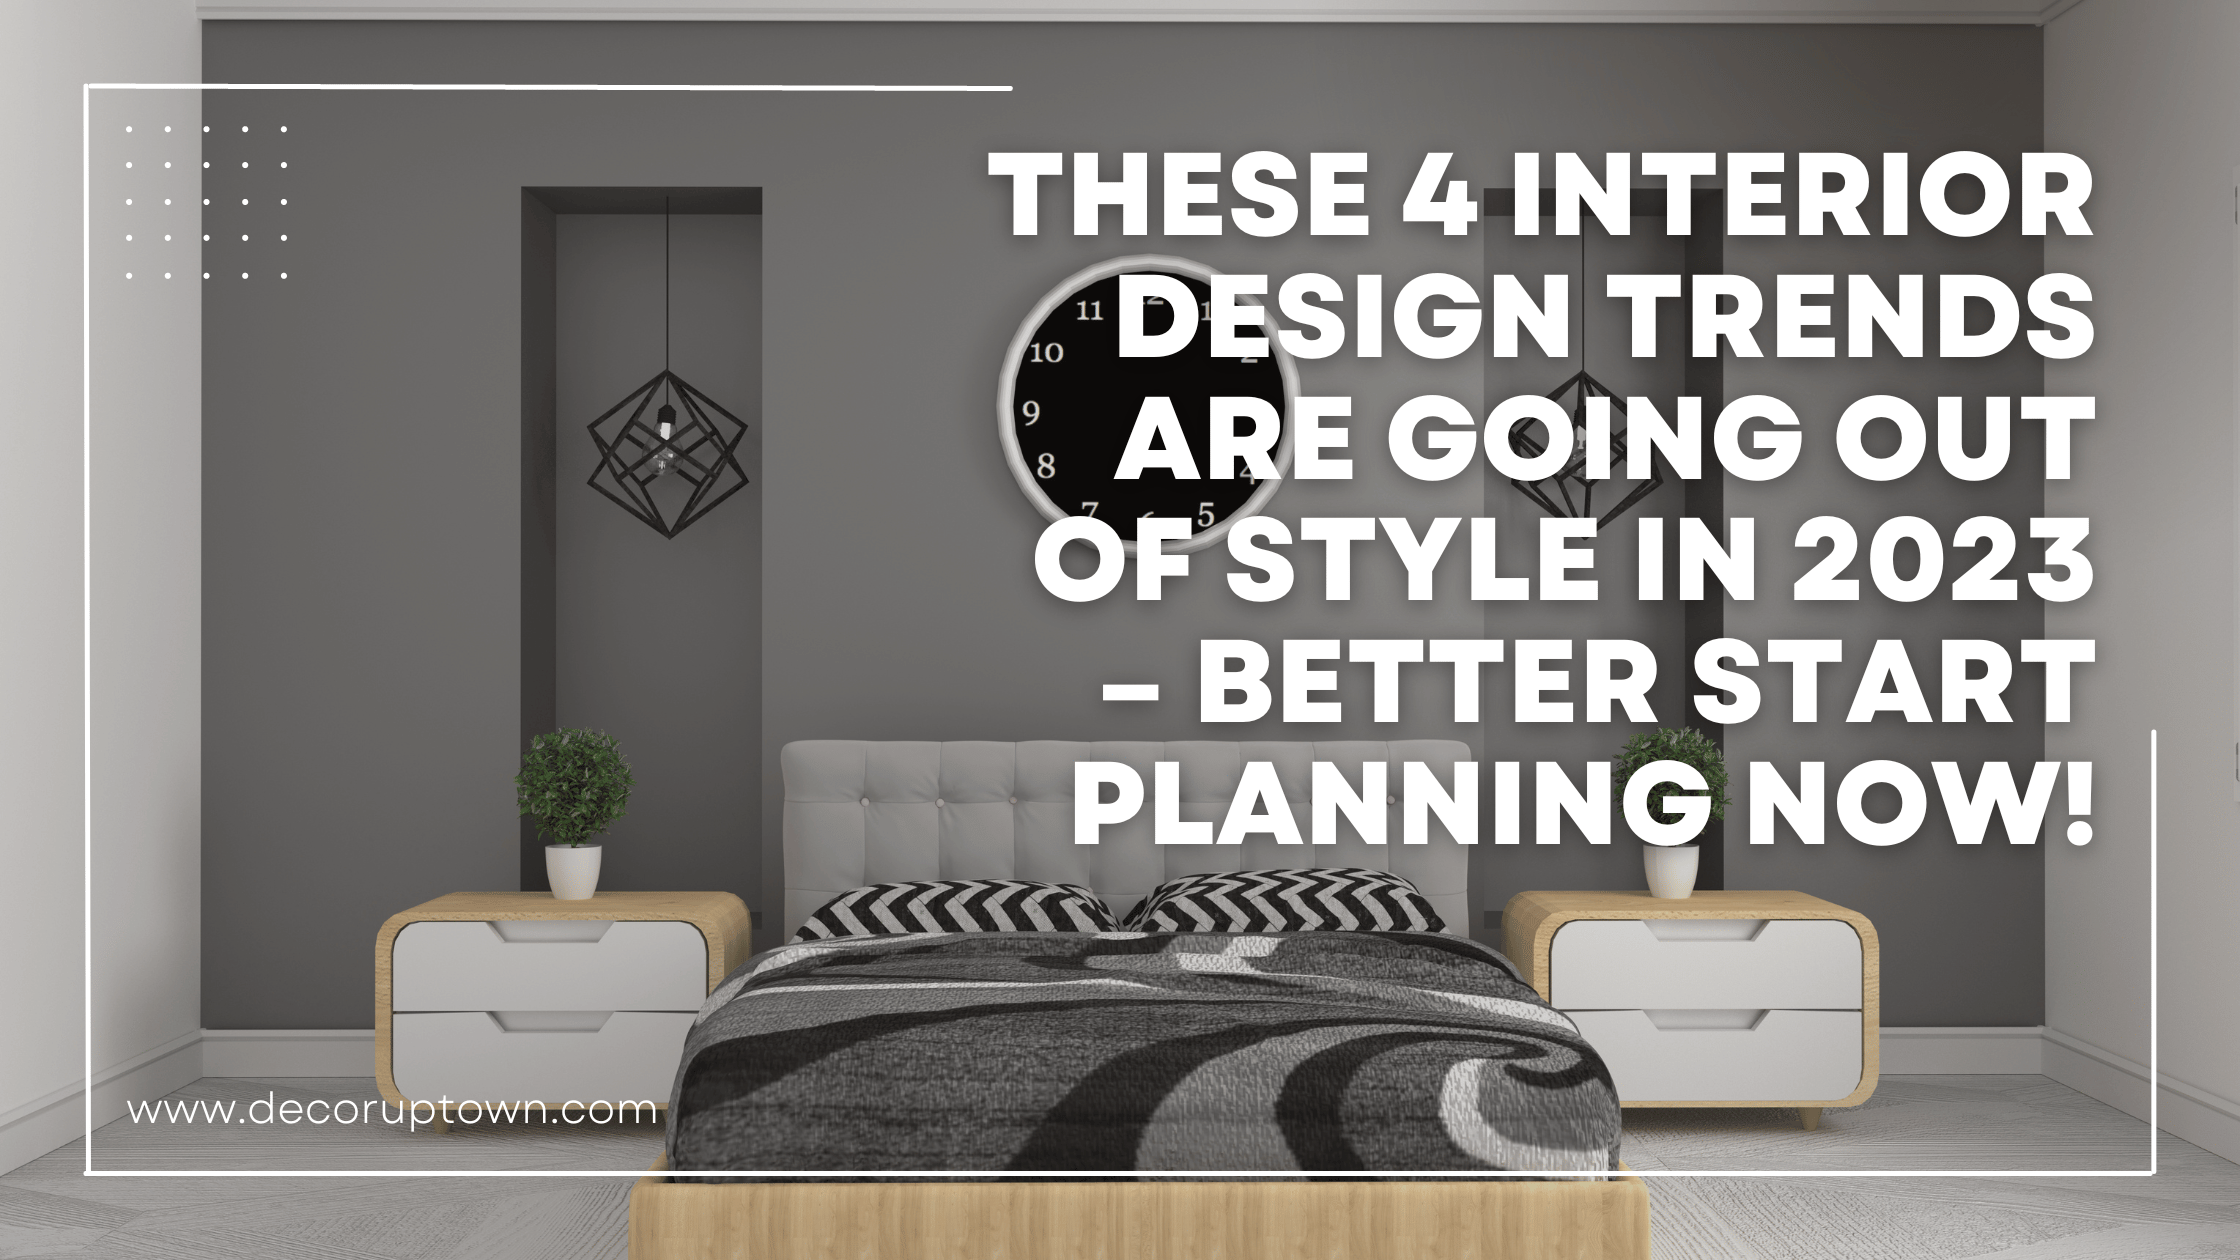 These 4 Interior Design Trends Are Going Out Of Style In 2023 – Better Start Planning Now!